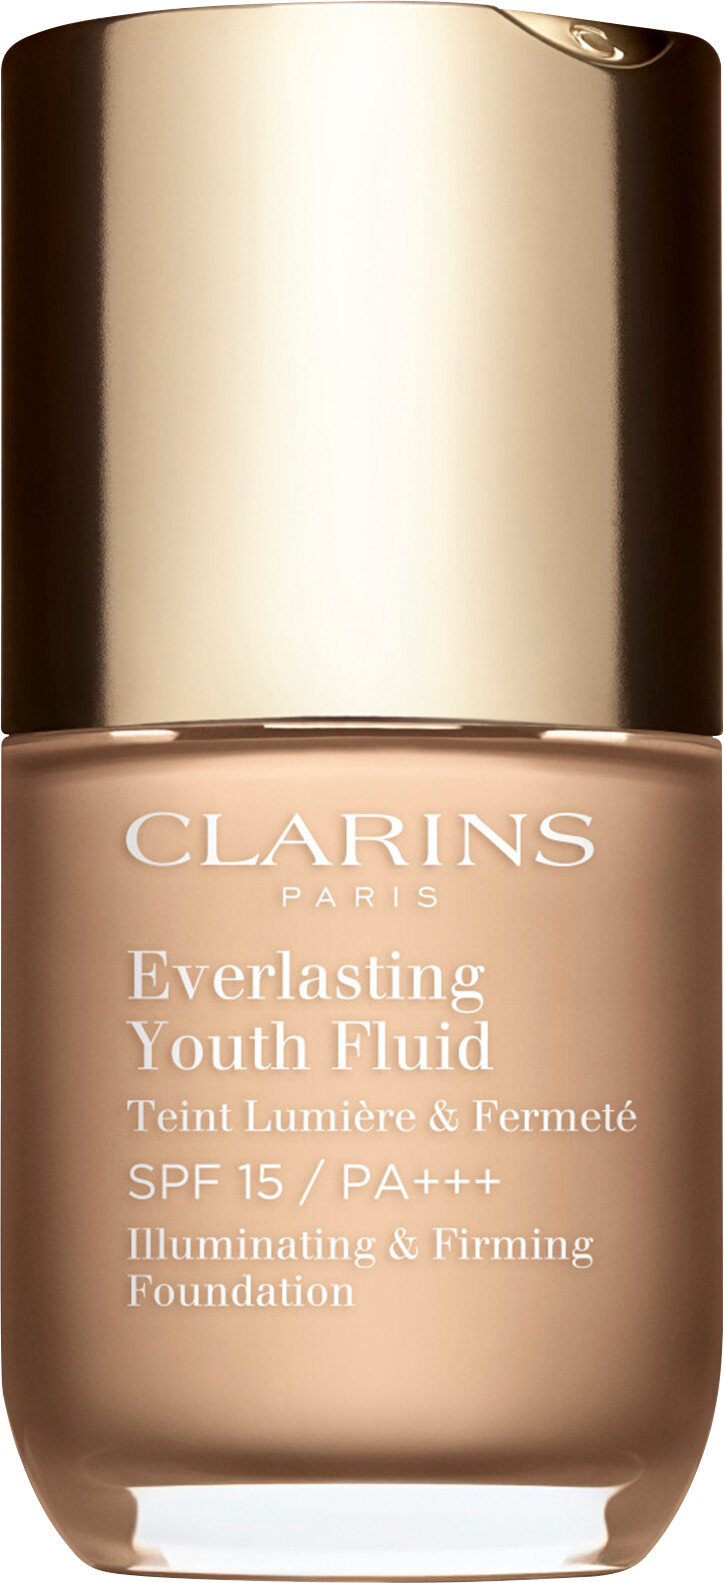 Clarins Everlasting Youth Fluid Illuminating and Firming Foundation SPF15 30ml 105 - Nude